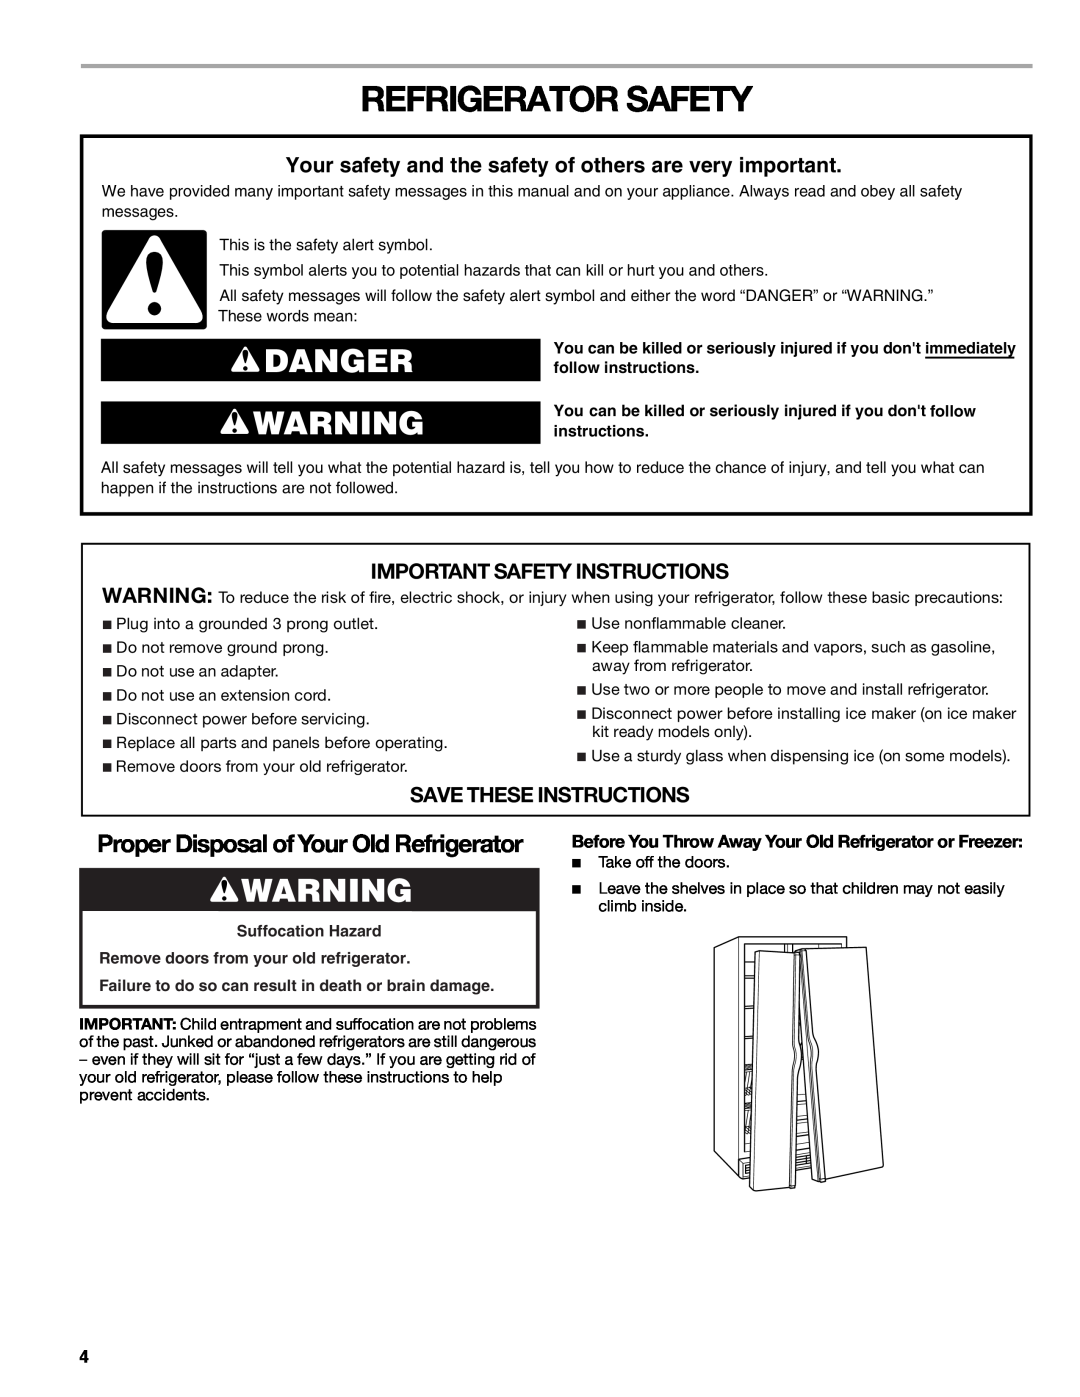 Sears T1KB2/T1RFKB2 Refrigerator Safety, Danger, Proper Disposal of Your Old Refrigerator, Important Safety Instructions 